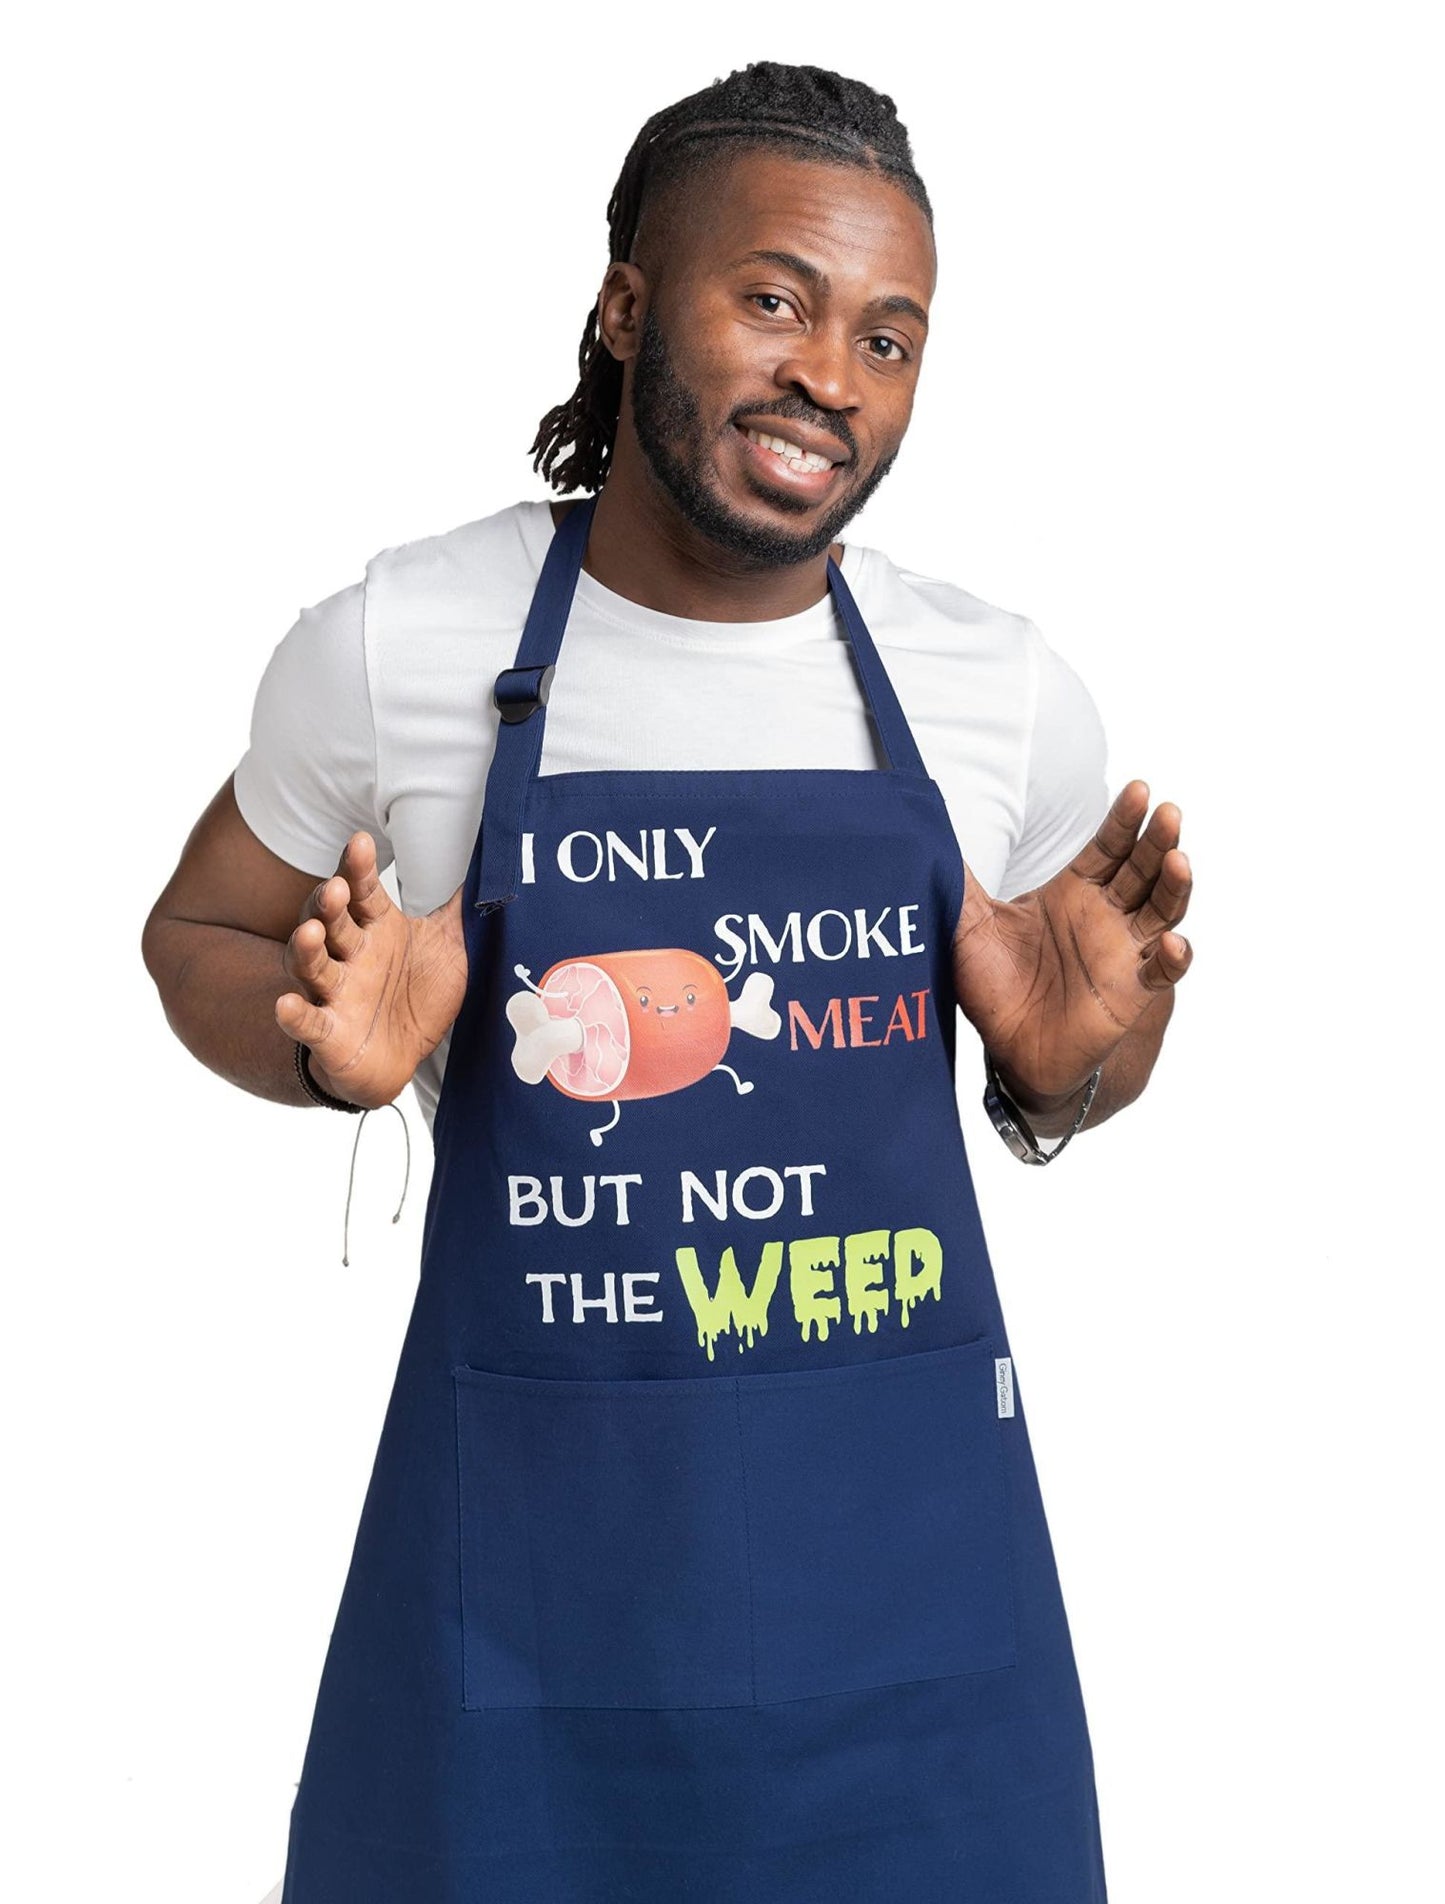 Funny Aprons For Men Mens Aprons For Cooking Grill Party Apron Gift for Friend